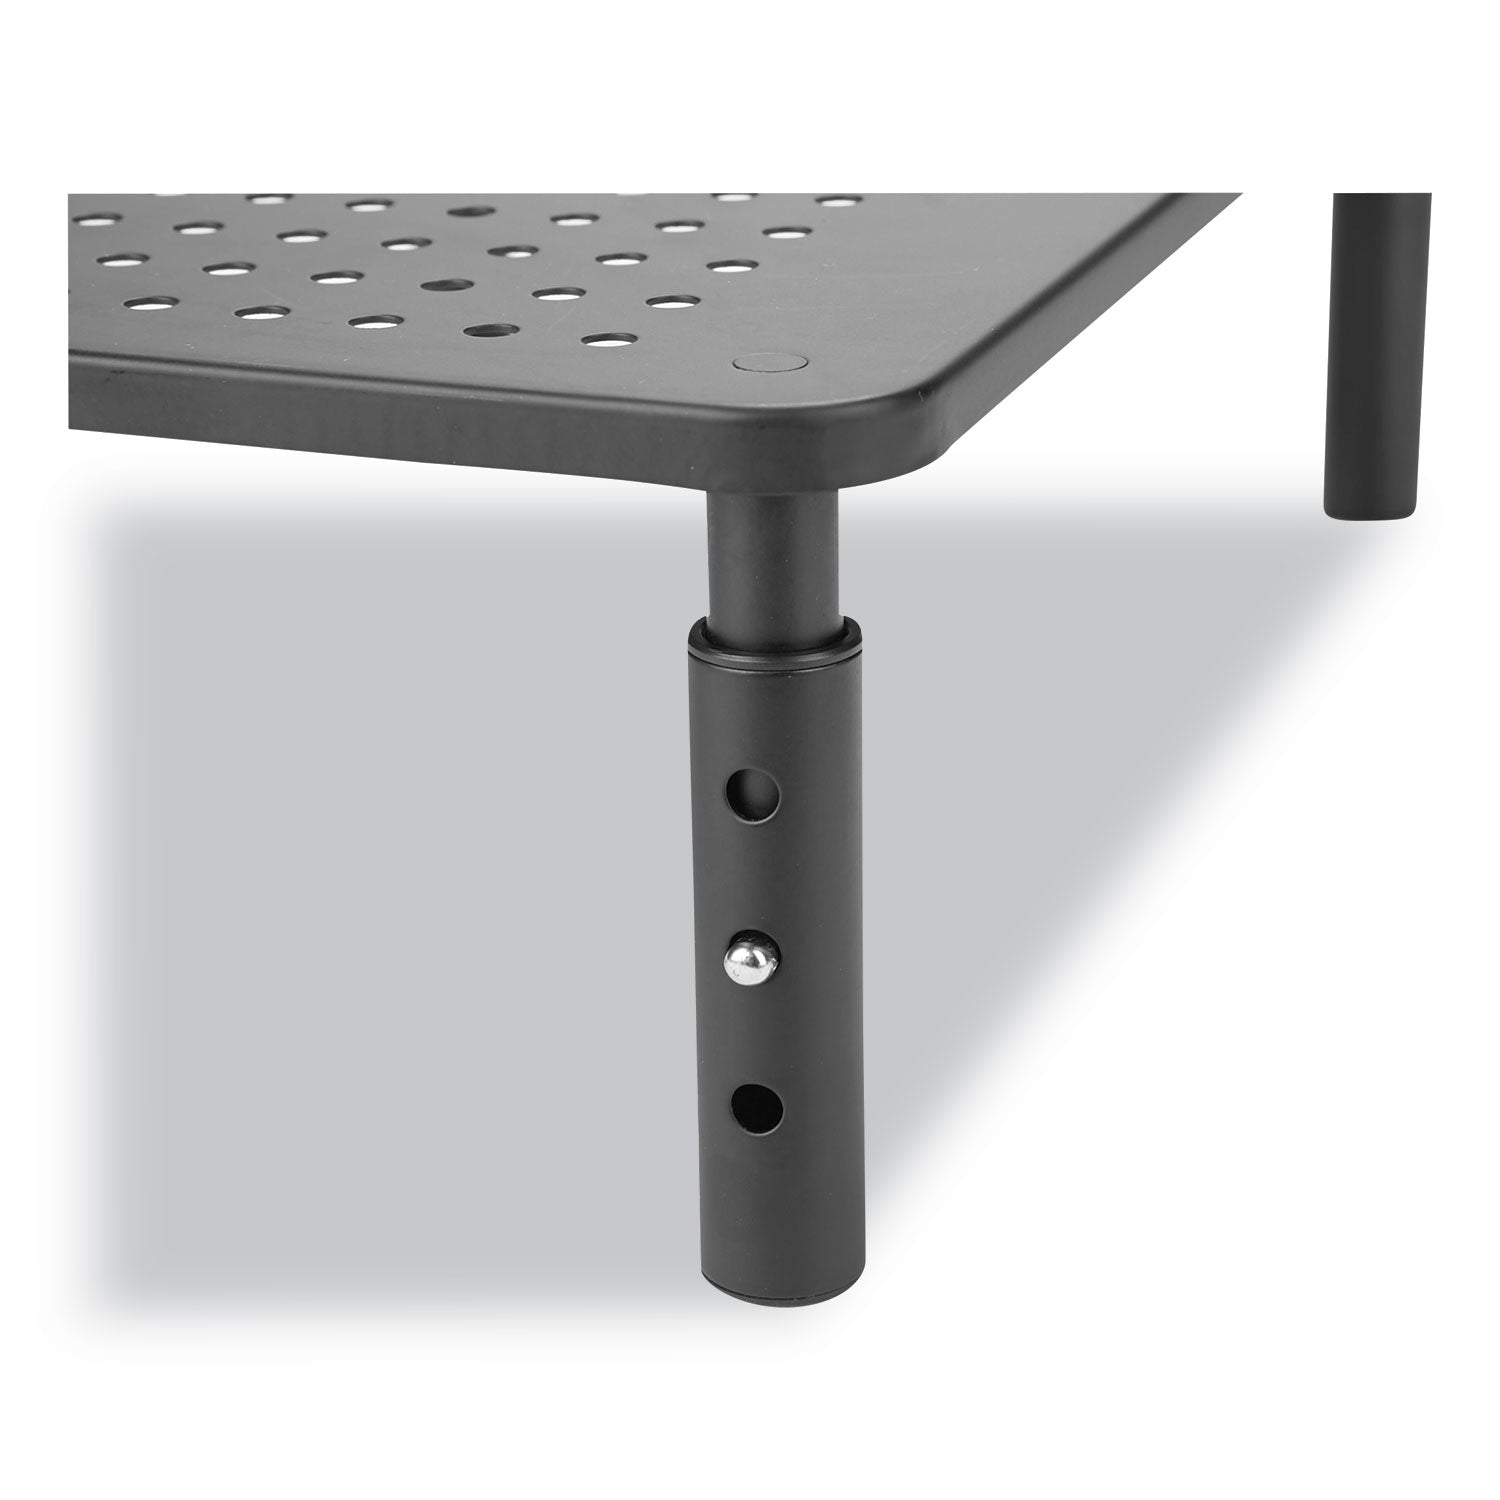 adjustable-rectangular-monitor-stand-14-x-9-x-325-to-525-black-supports-44-lbs_ems4legmetblk - 5